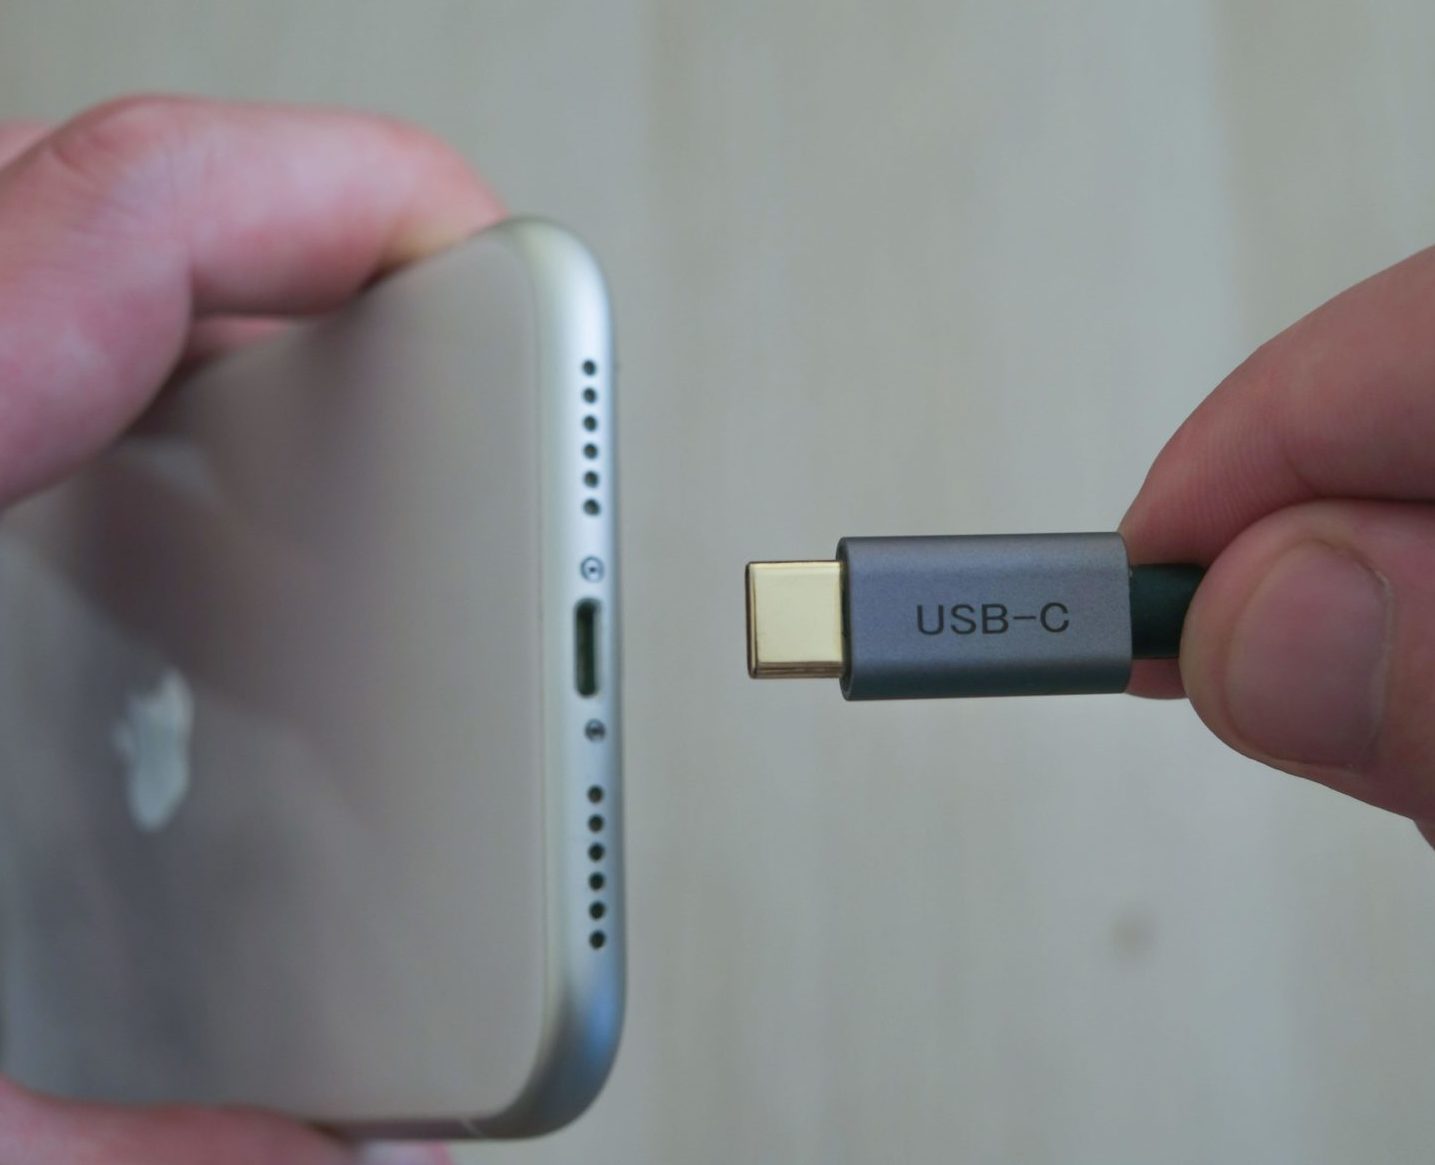 A person holds an Apple iPhone and a USB-C cable